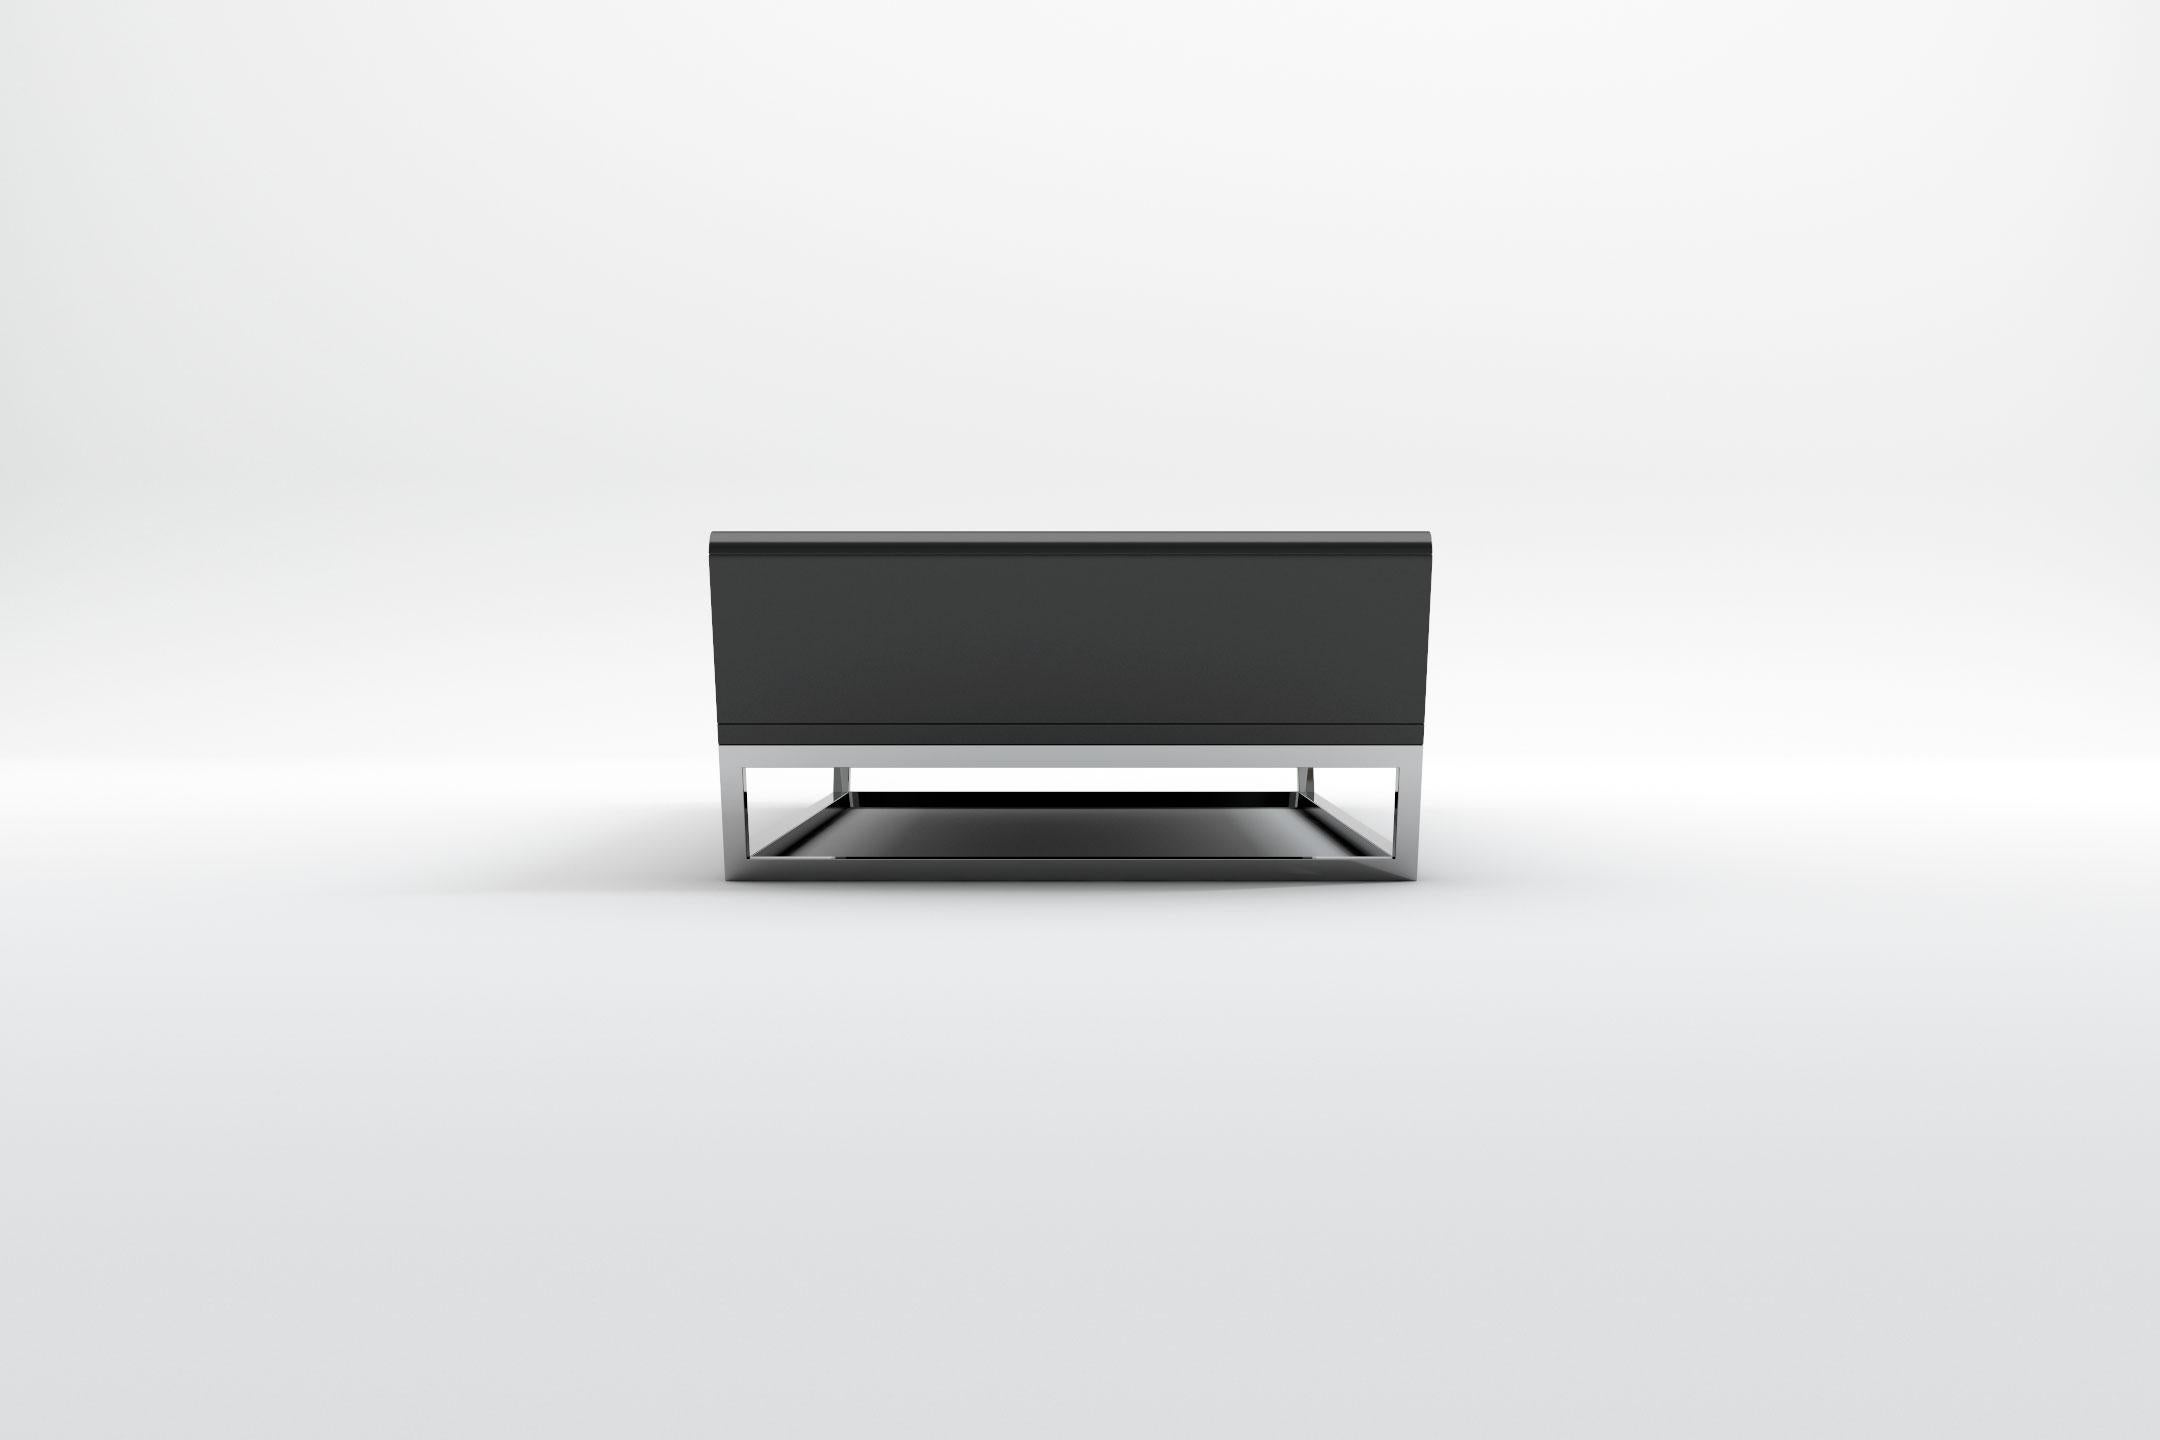 European Obsidian Coffee Table - Modern Black Lacquered Table with Stainless Steel Base For Sale